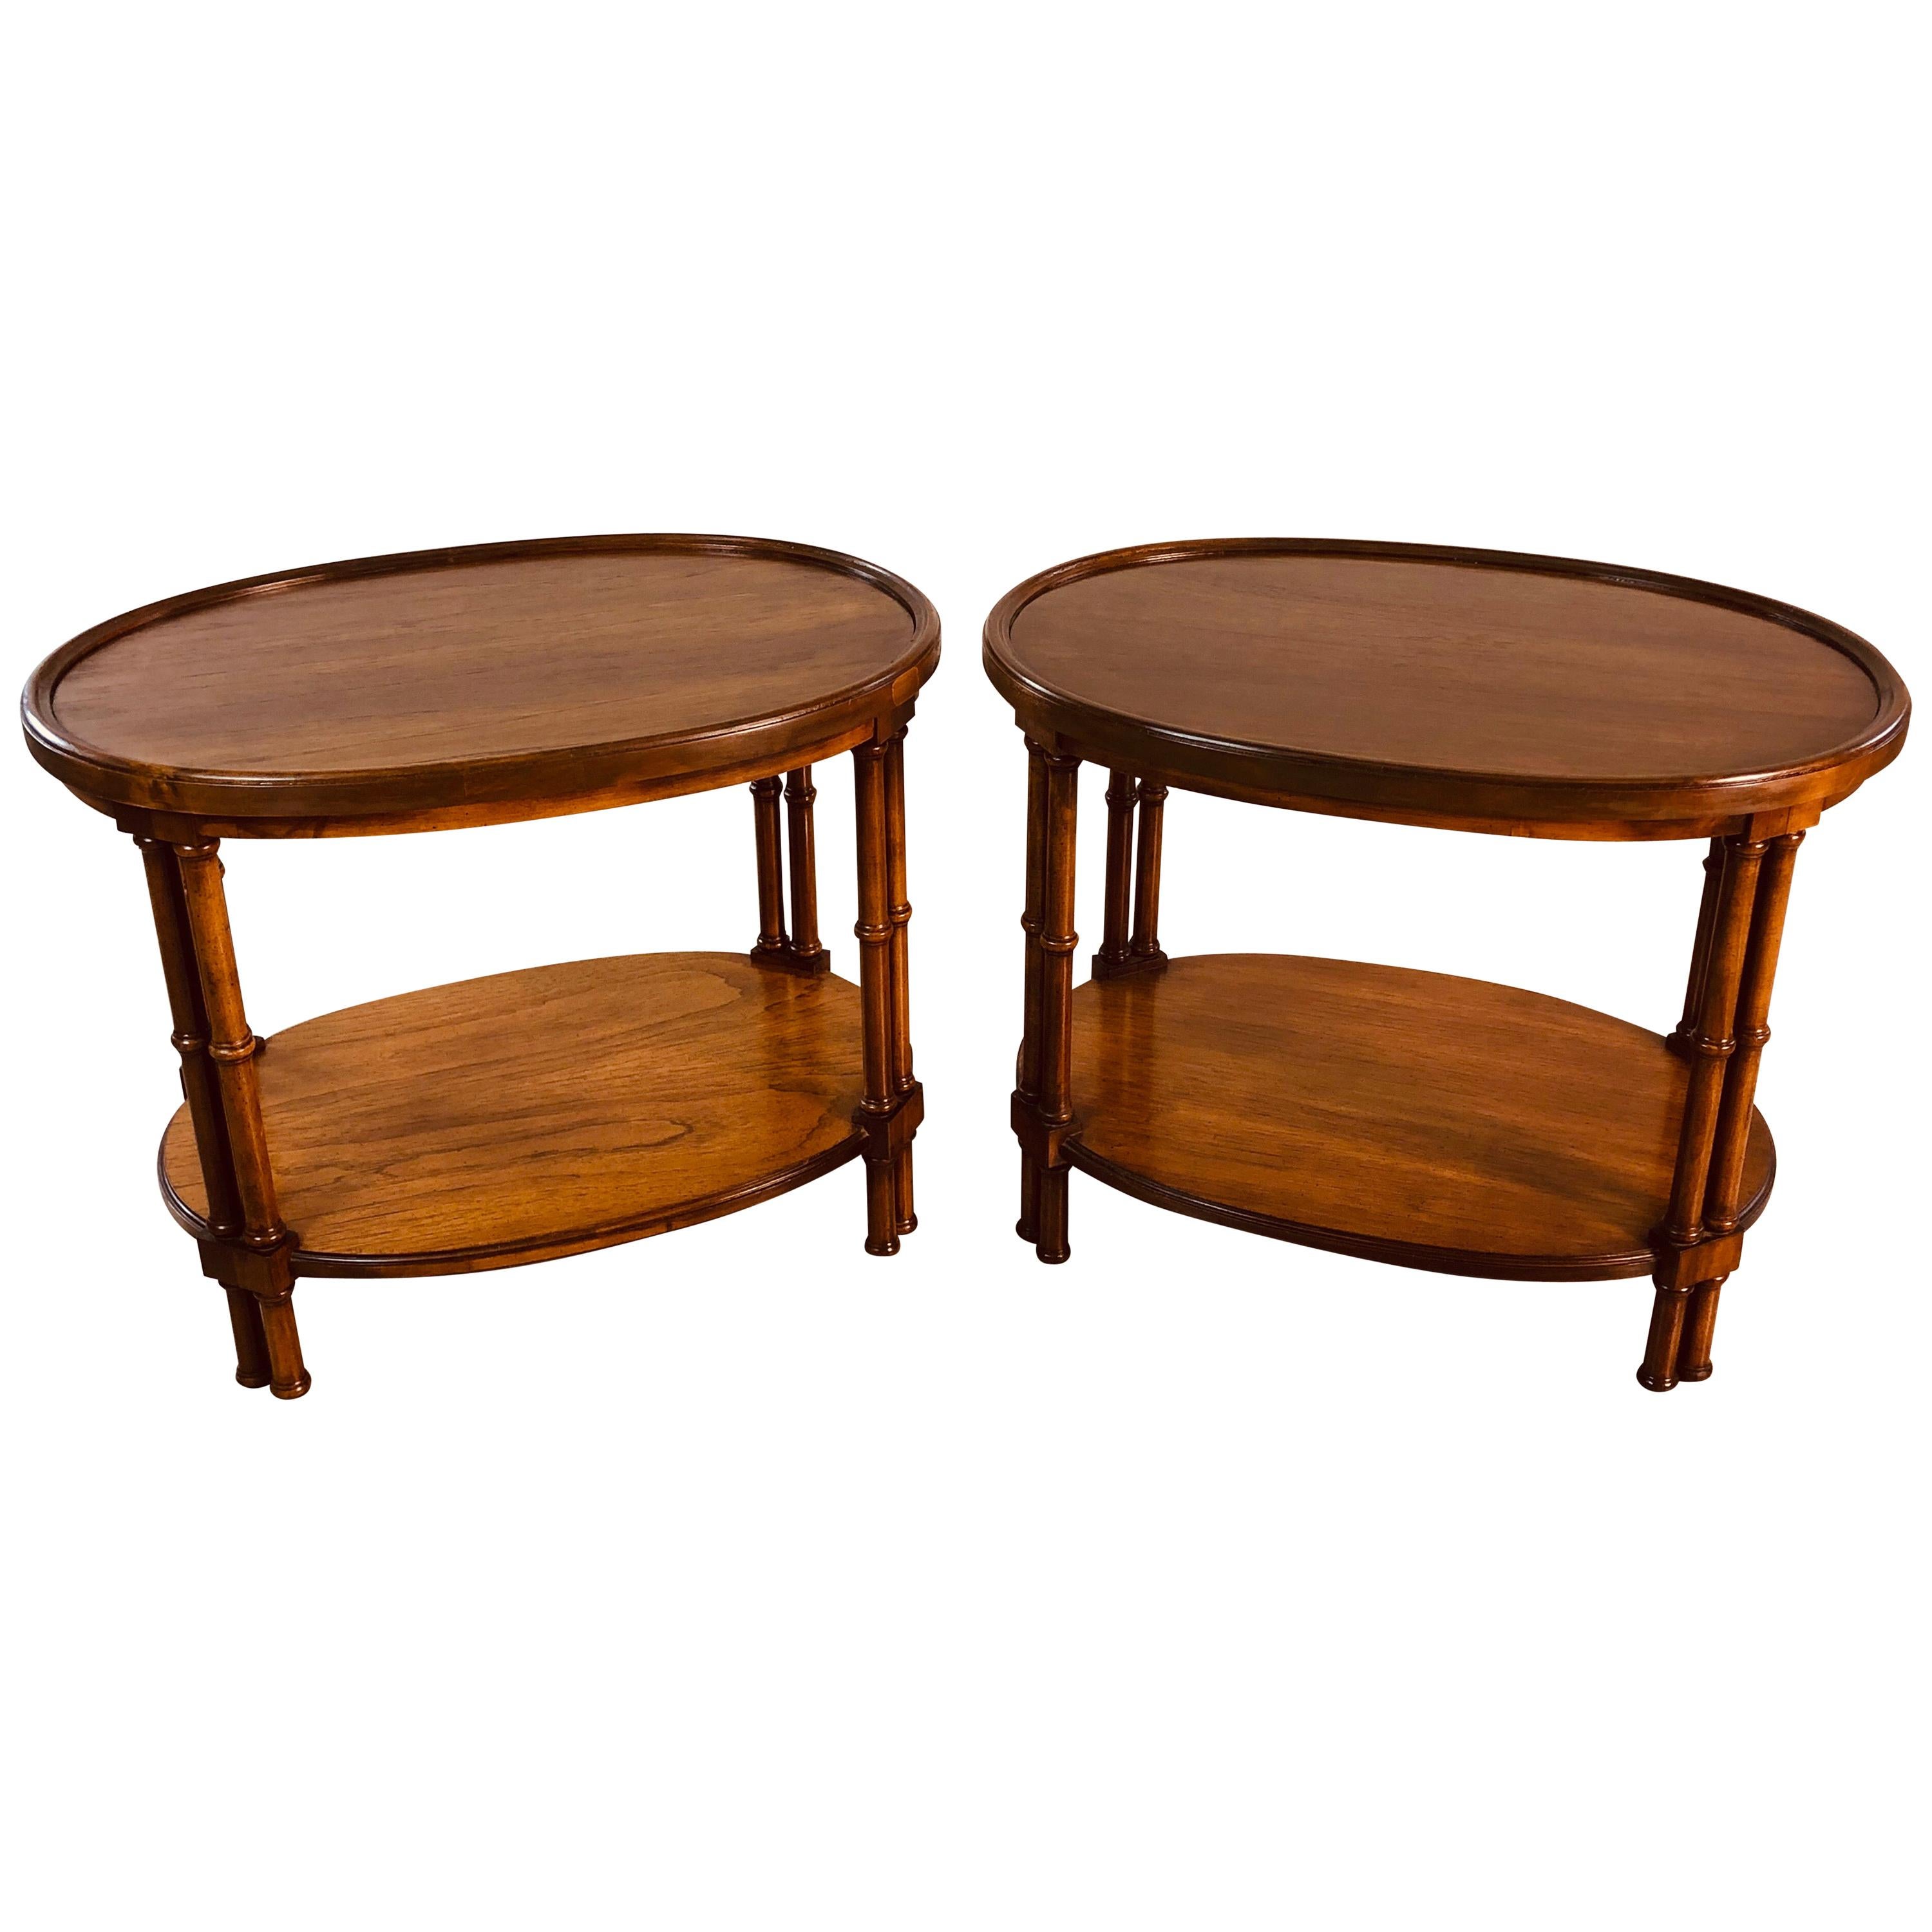 1960s Oval Mahogany Bamboo Style Brandt Furniture Side Tables, Pair For Sale